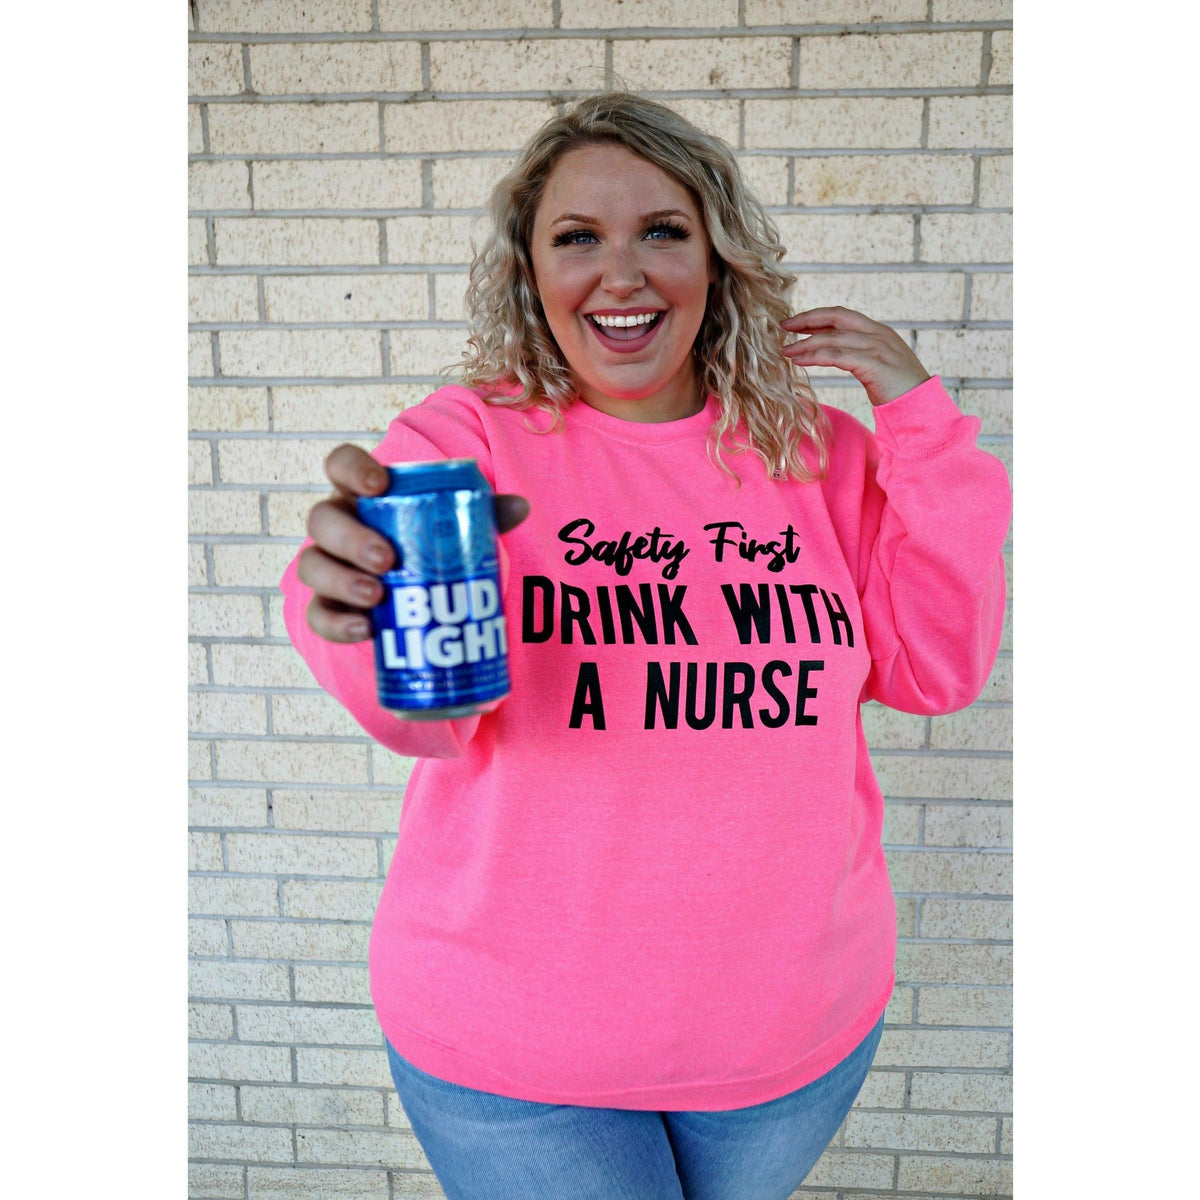 Safety First Drink with a Nurse tee or sweatshirt